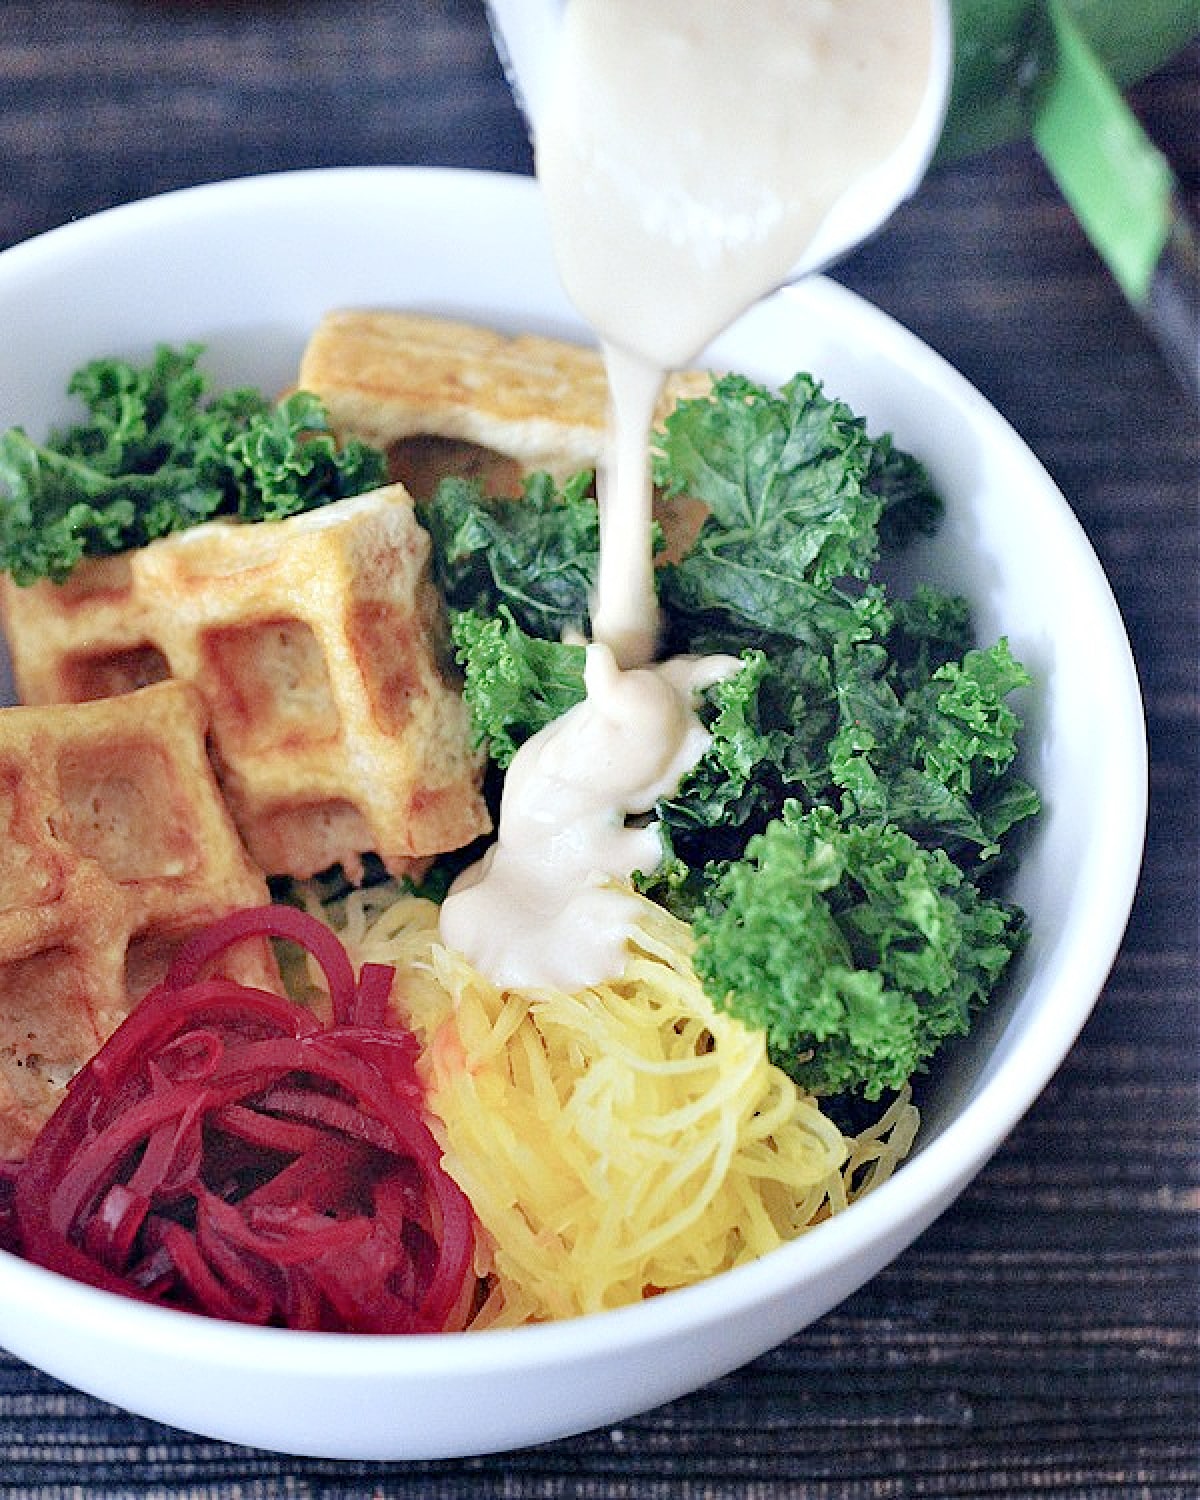 Veggie bowl with waffled tofu (spaghetti squash, roasted beet ribbons, marinated kale, and tofu cooked in the waffle maker) with a tahini sauce drizzled over top.